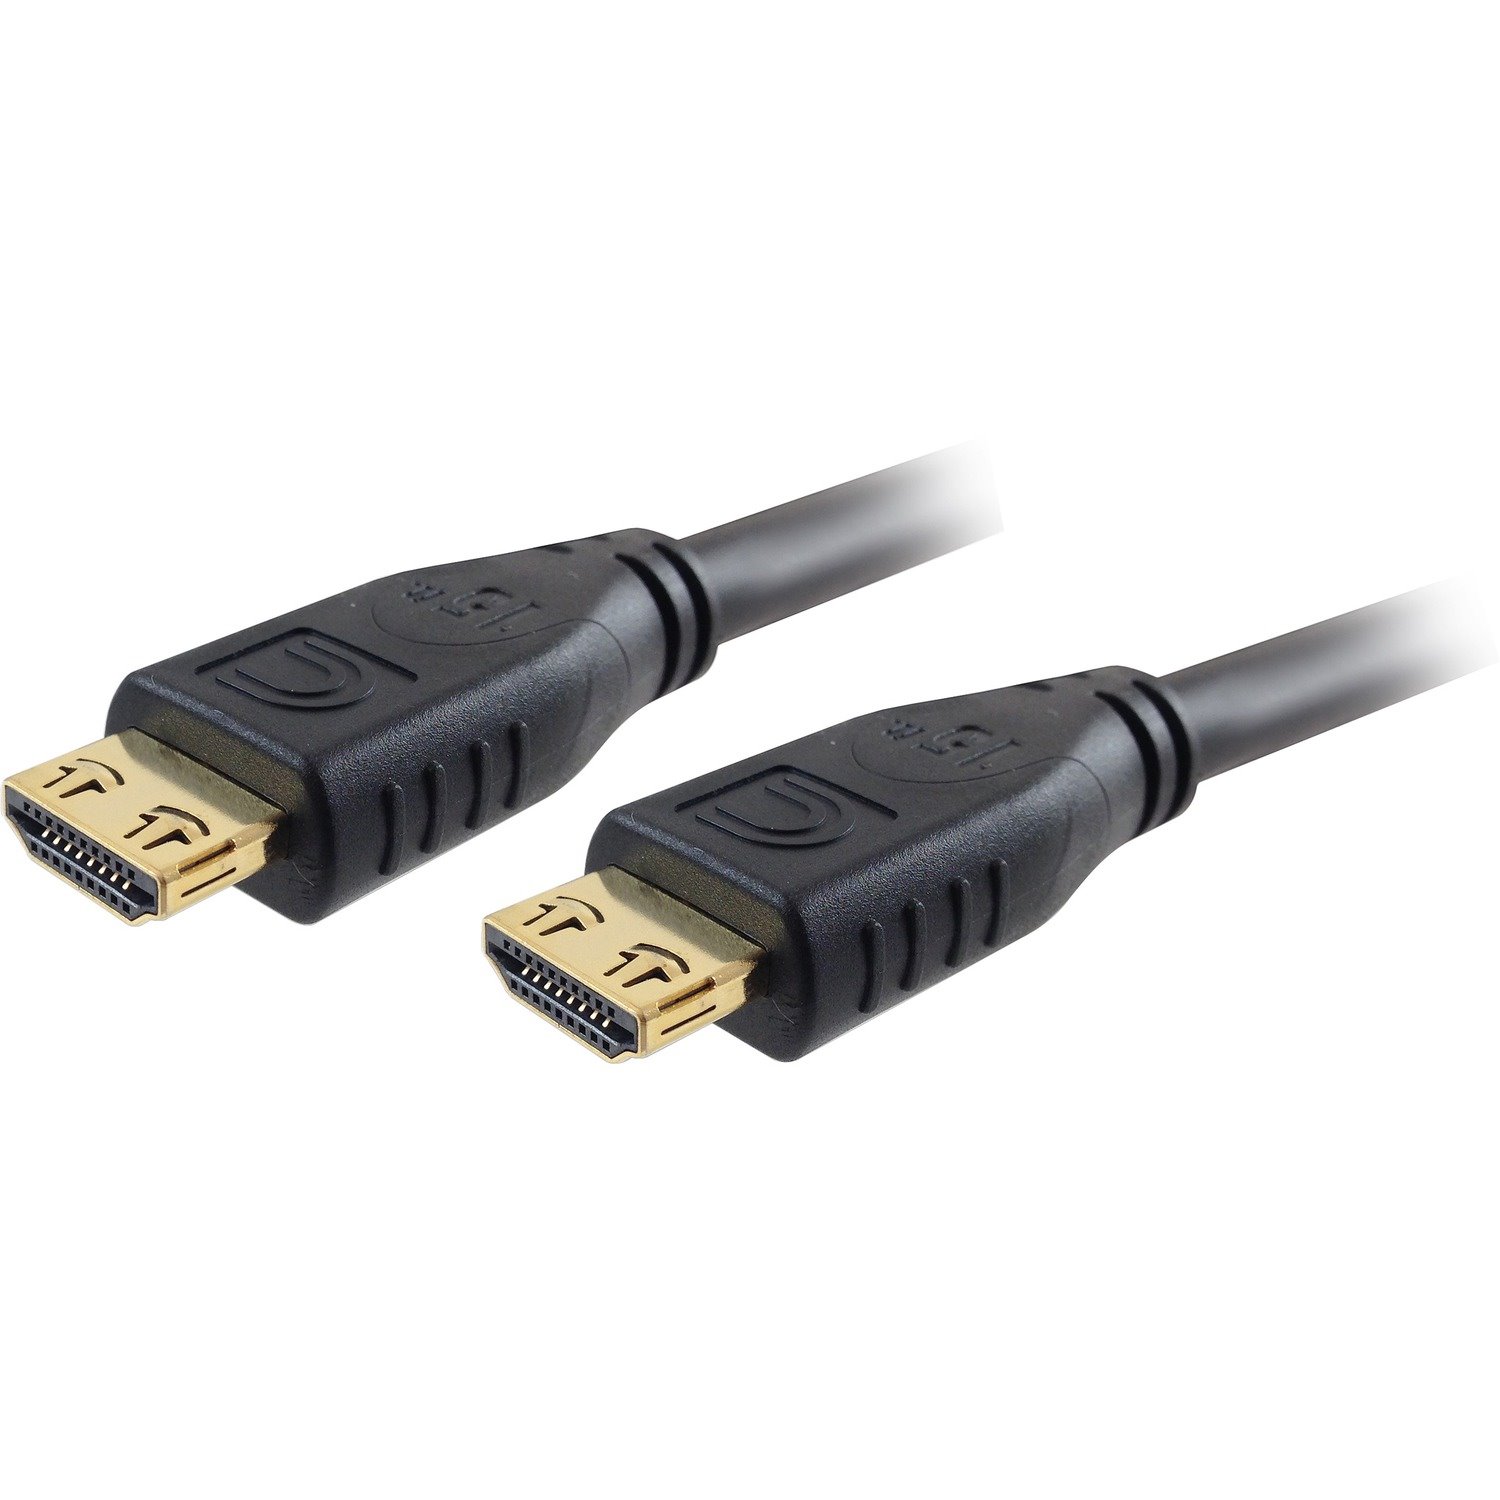 Comprehensive Pro AV/IT High Speed HDMI Cable with ProGrip, SureLength, CL3- Jet Black 35ft